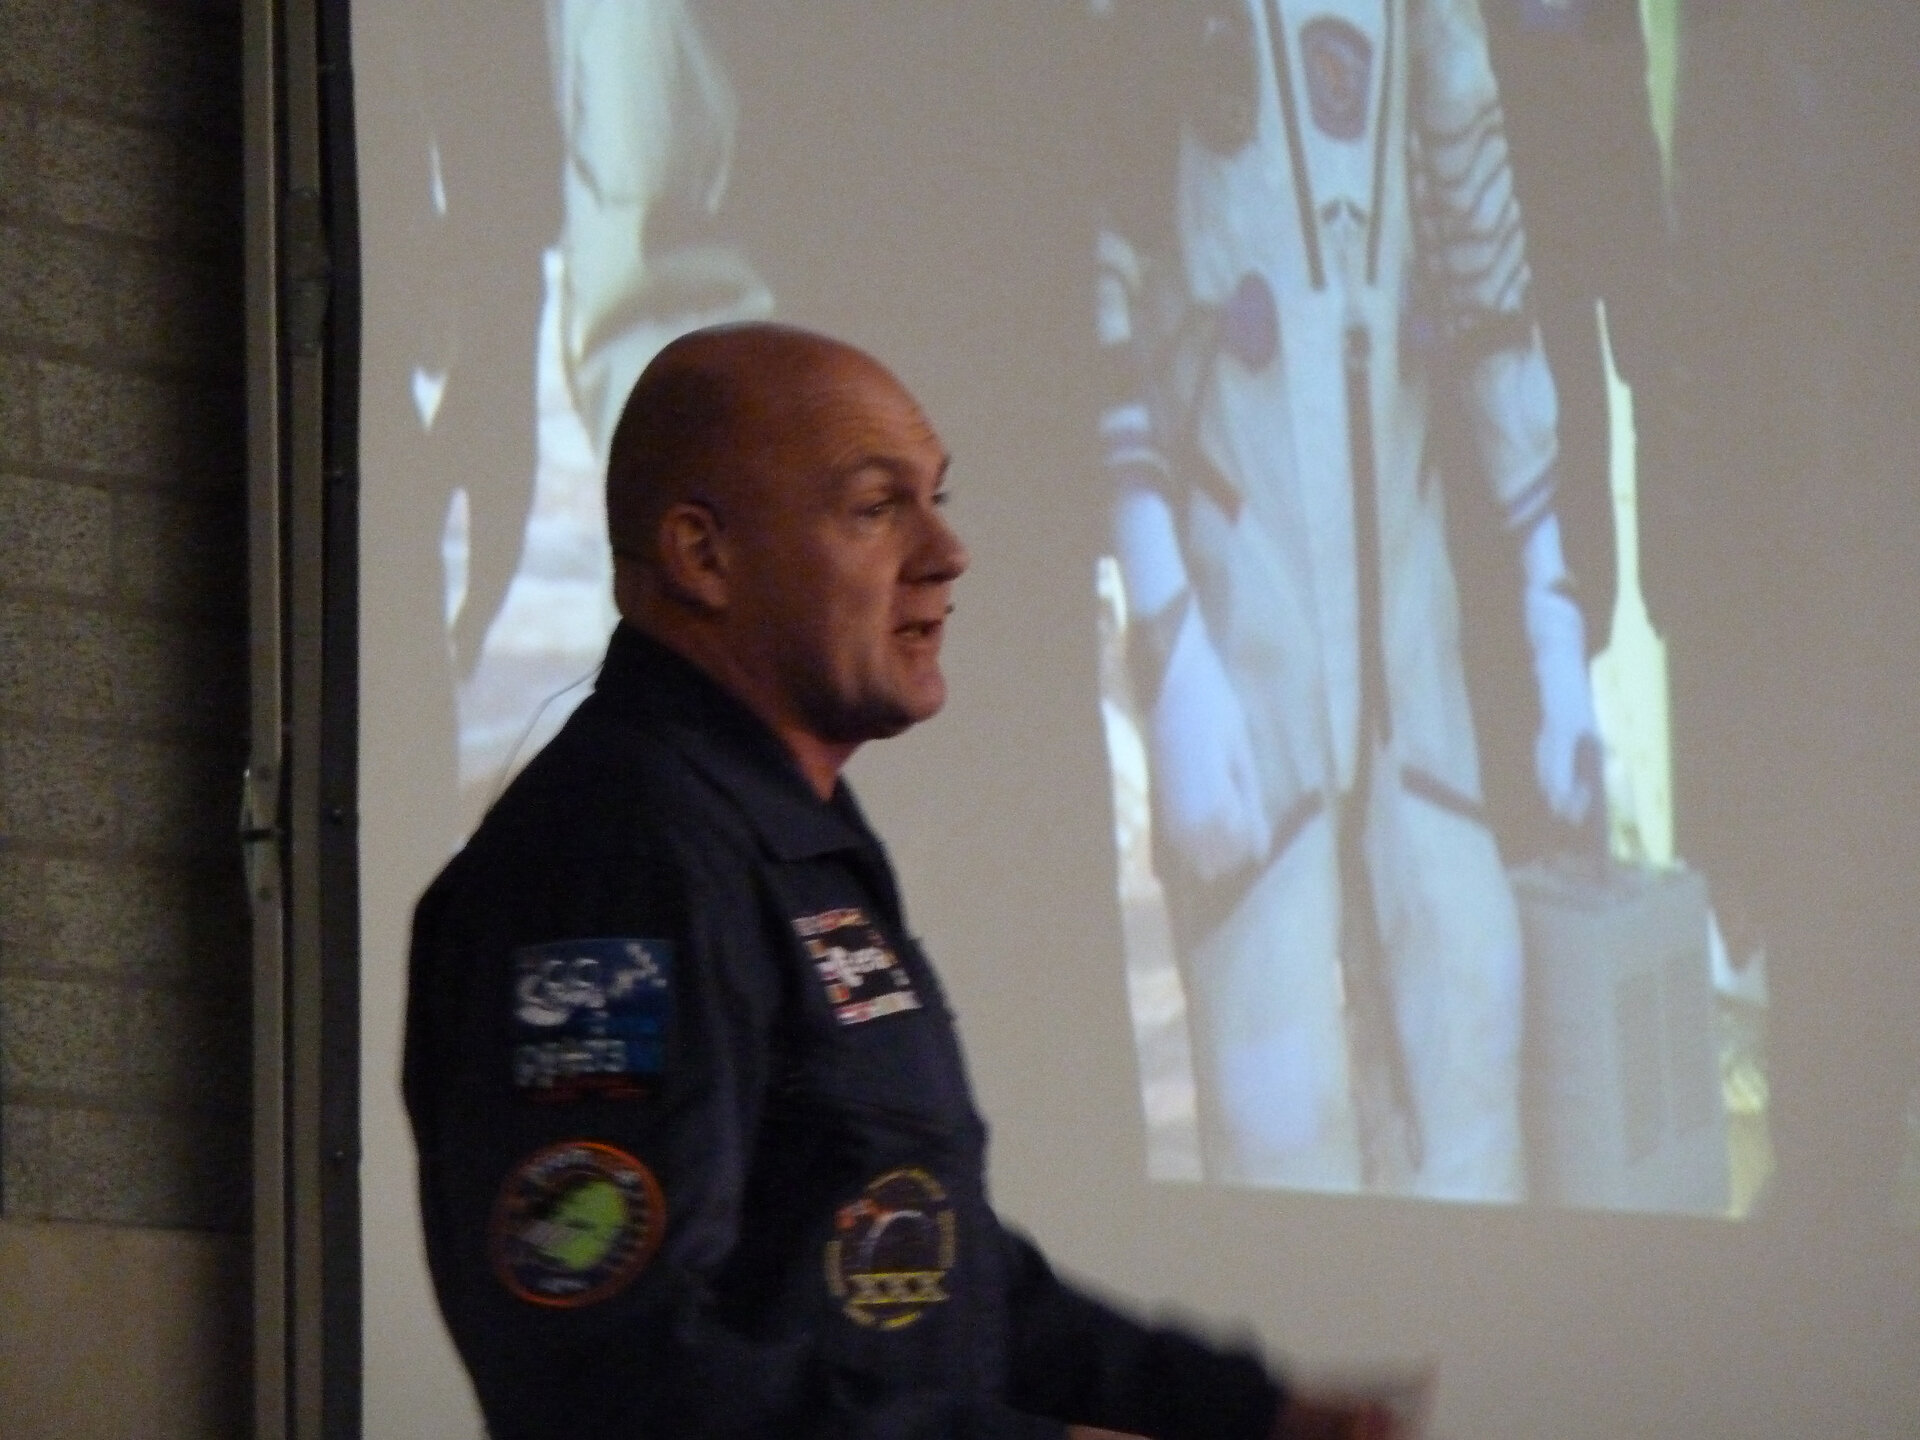 André Kuipers answering questions